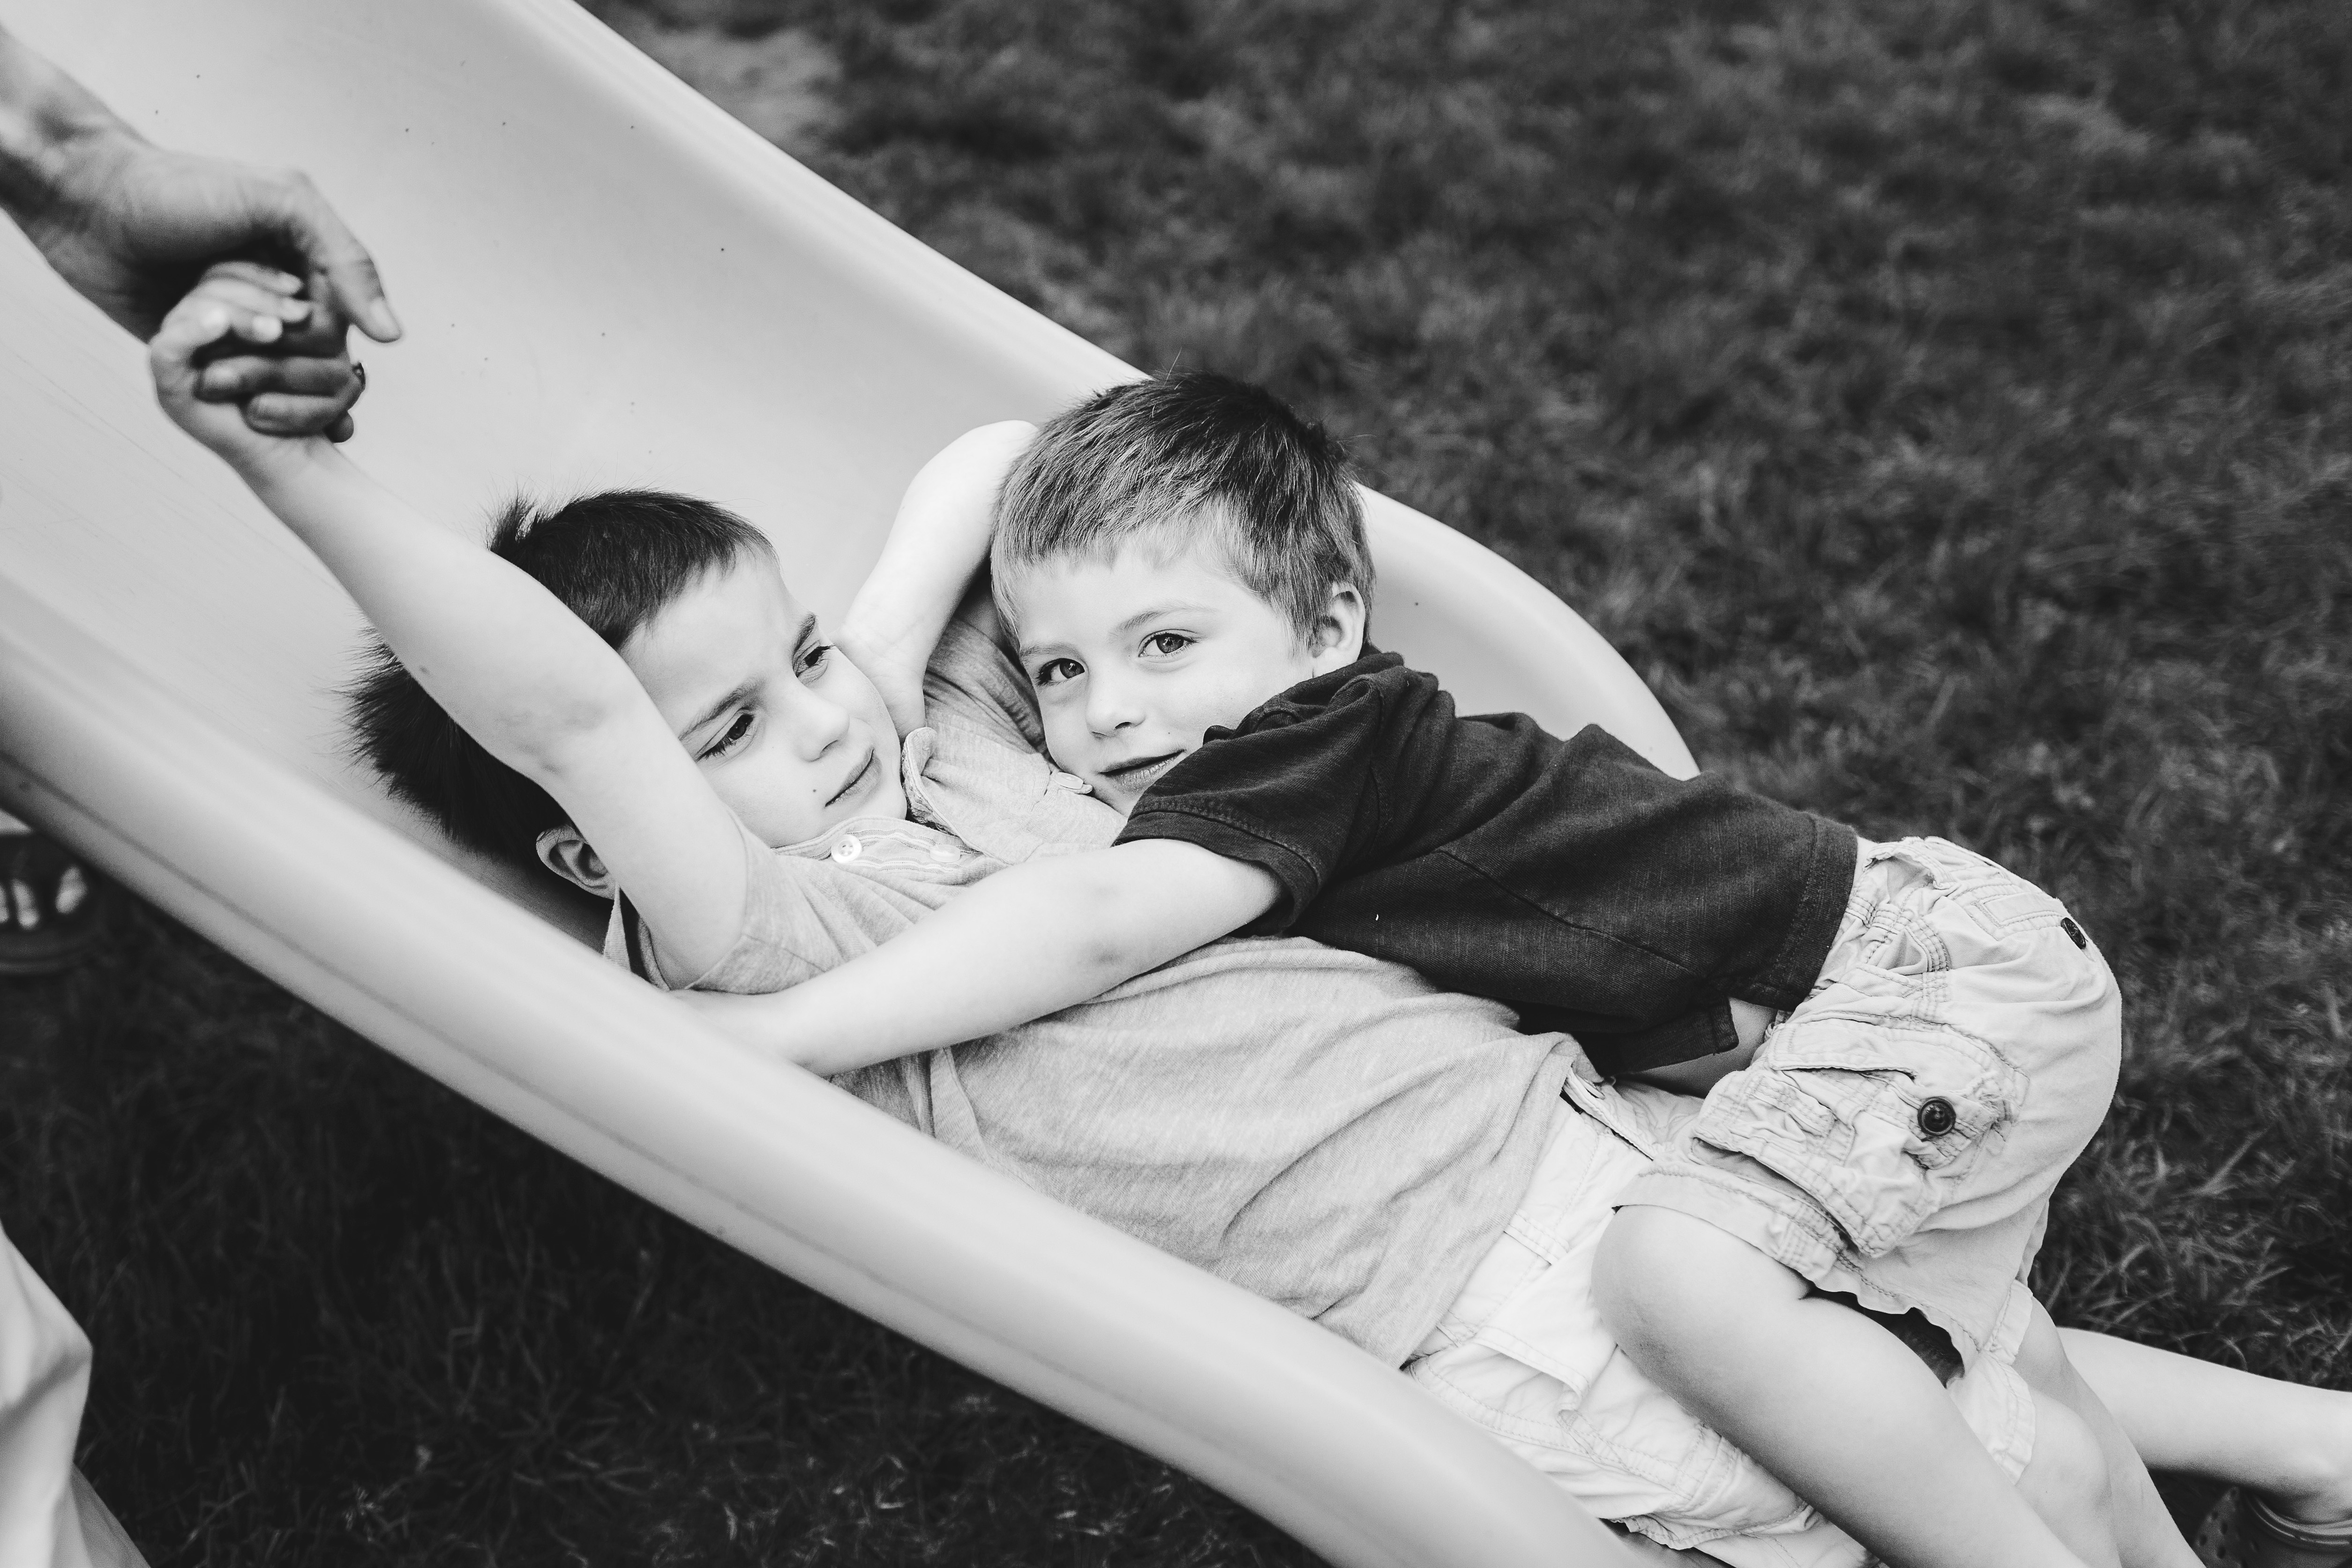 brothers hugging on slide one holding dad's hand